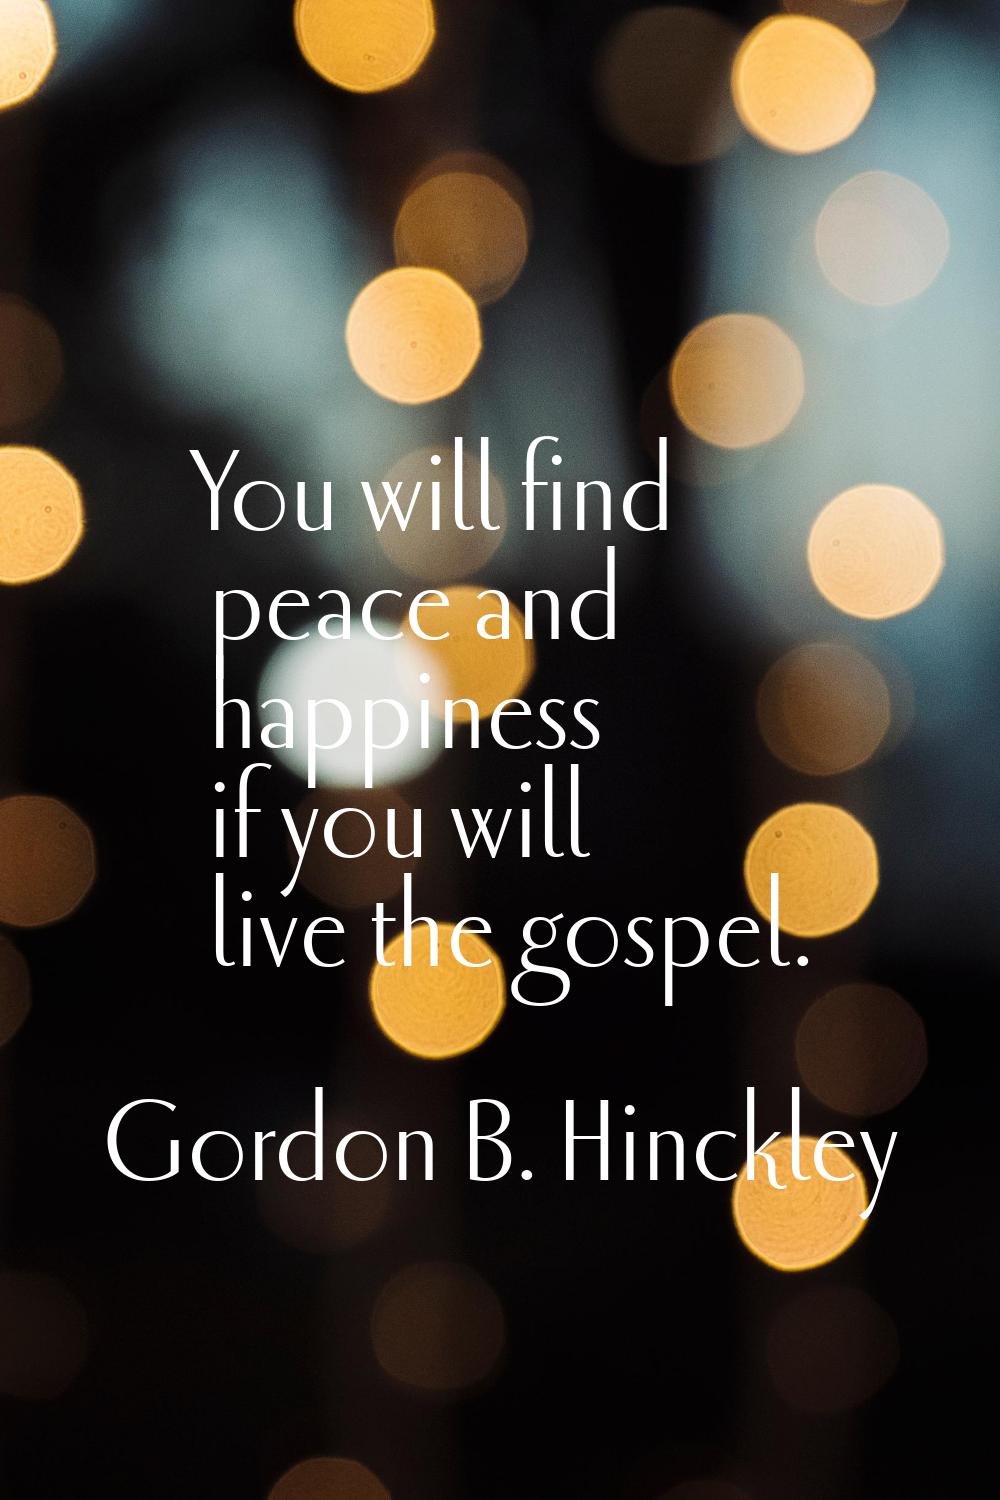 You will find peace and happiness if you will live the gospel.